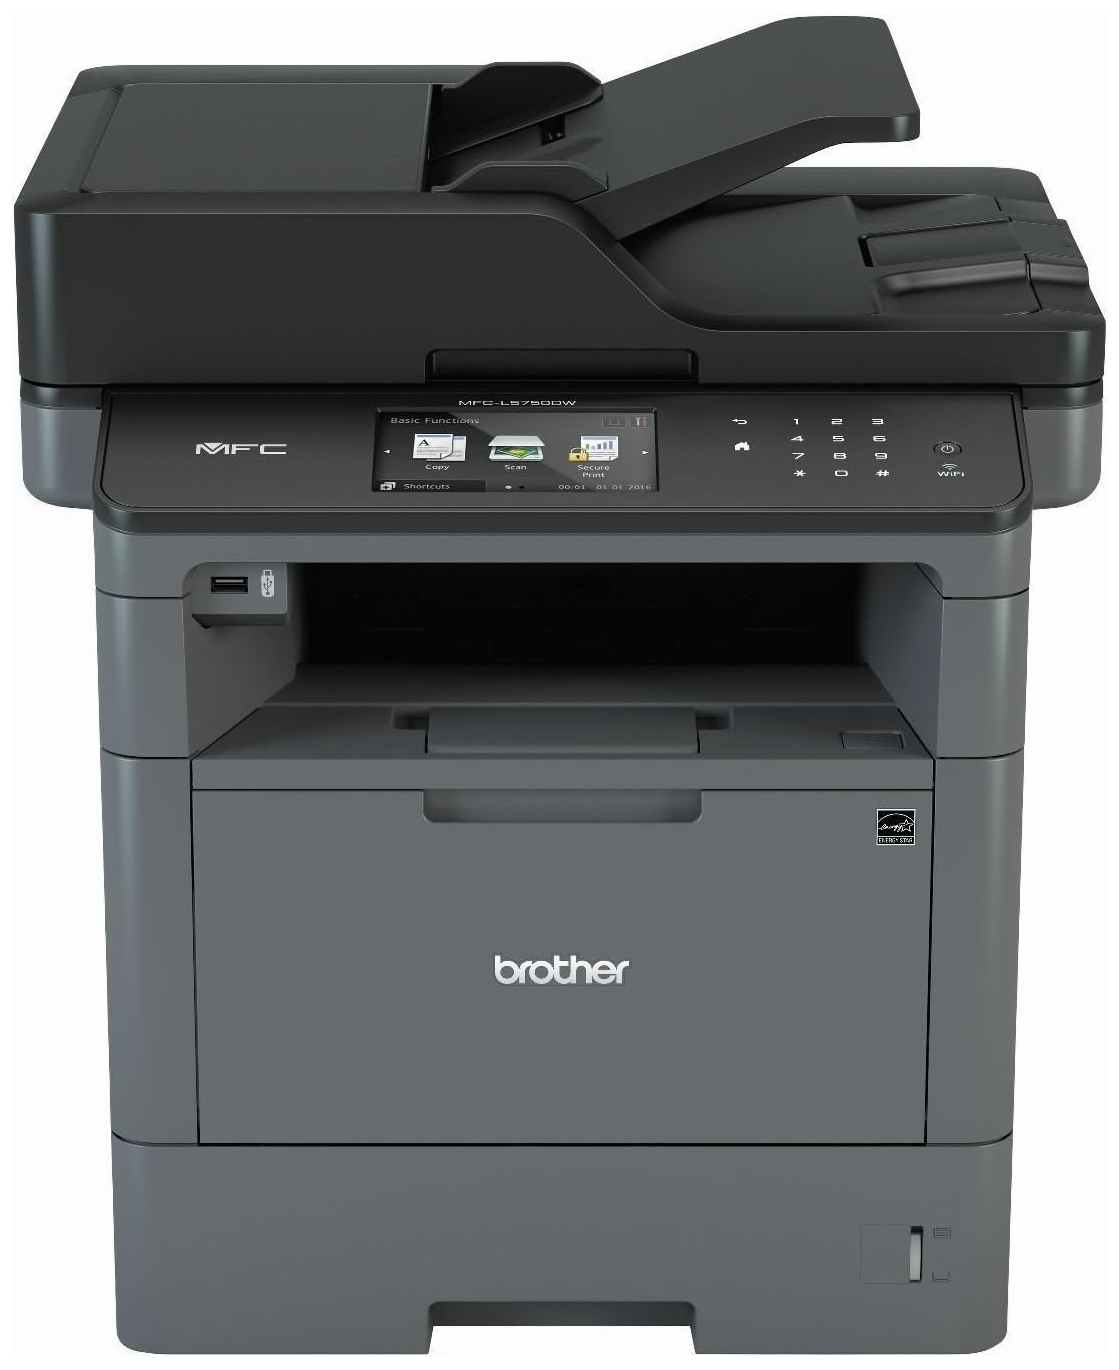 МФУ brother MFC-l5750dw. Brother DCP 5500dn. Принтер brother DCP l5500dn. МФУ brother MFC-l5700dn. Brother 5750